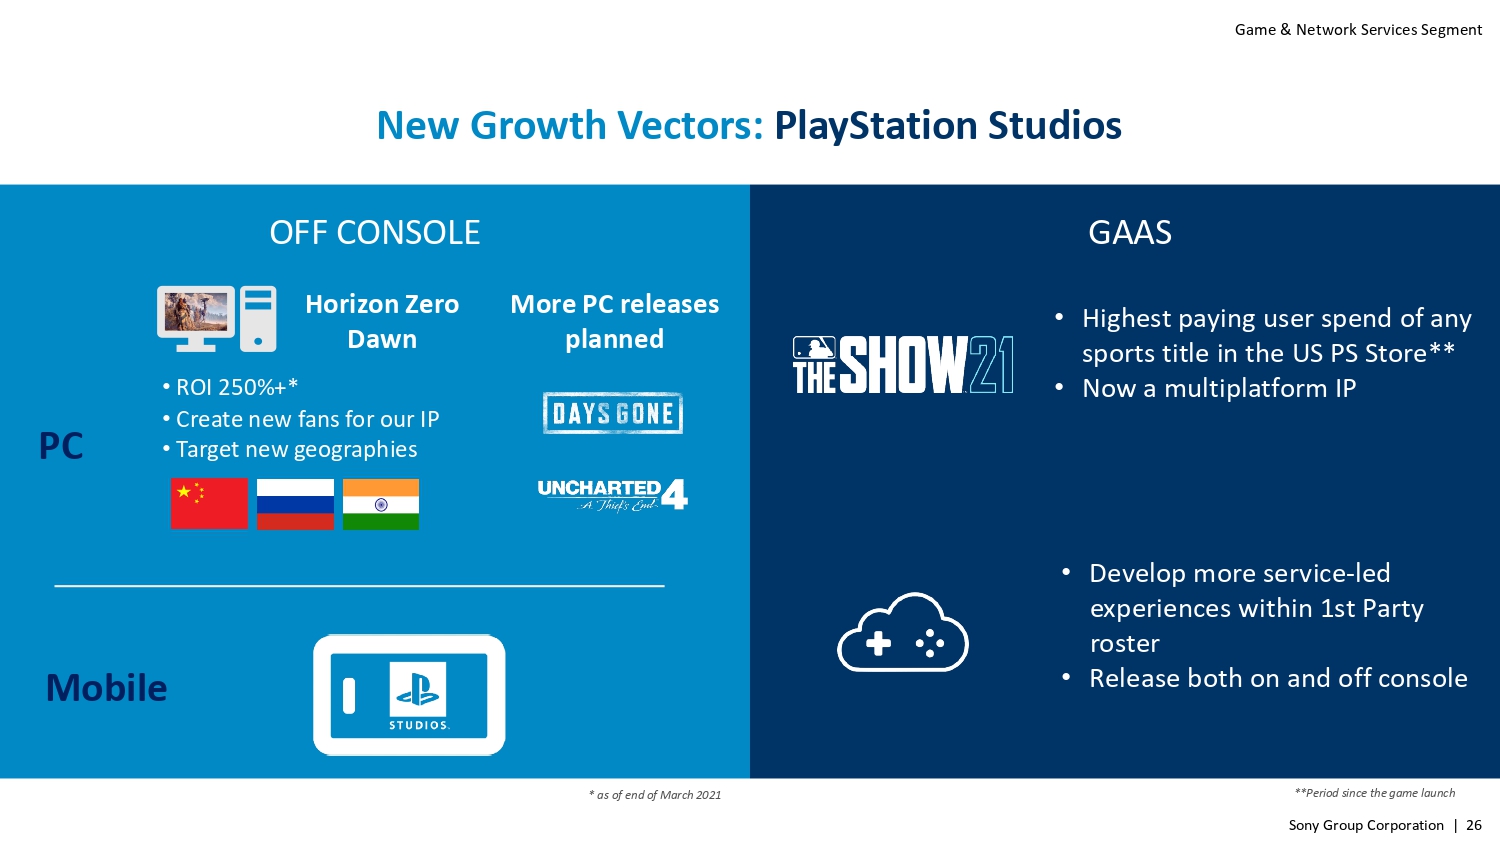 Uncharted 4 PC release planned - Sony presentation slide